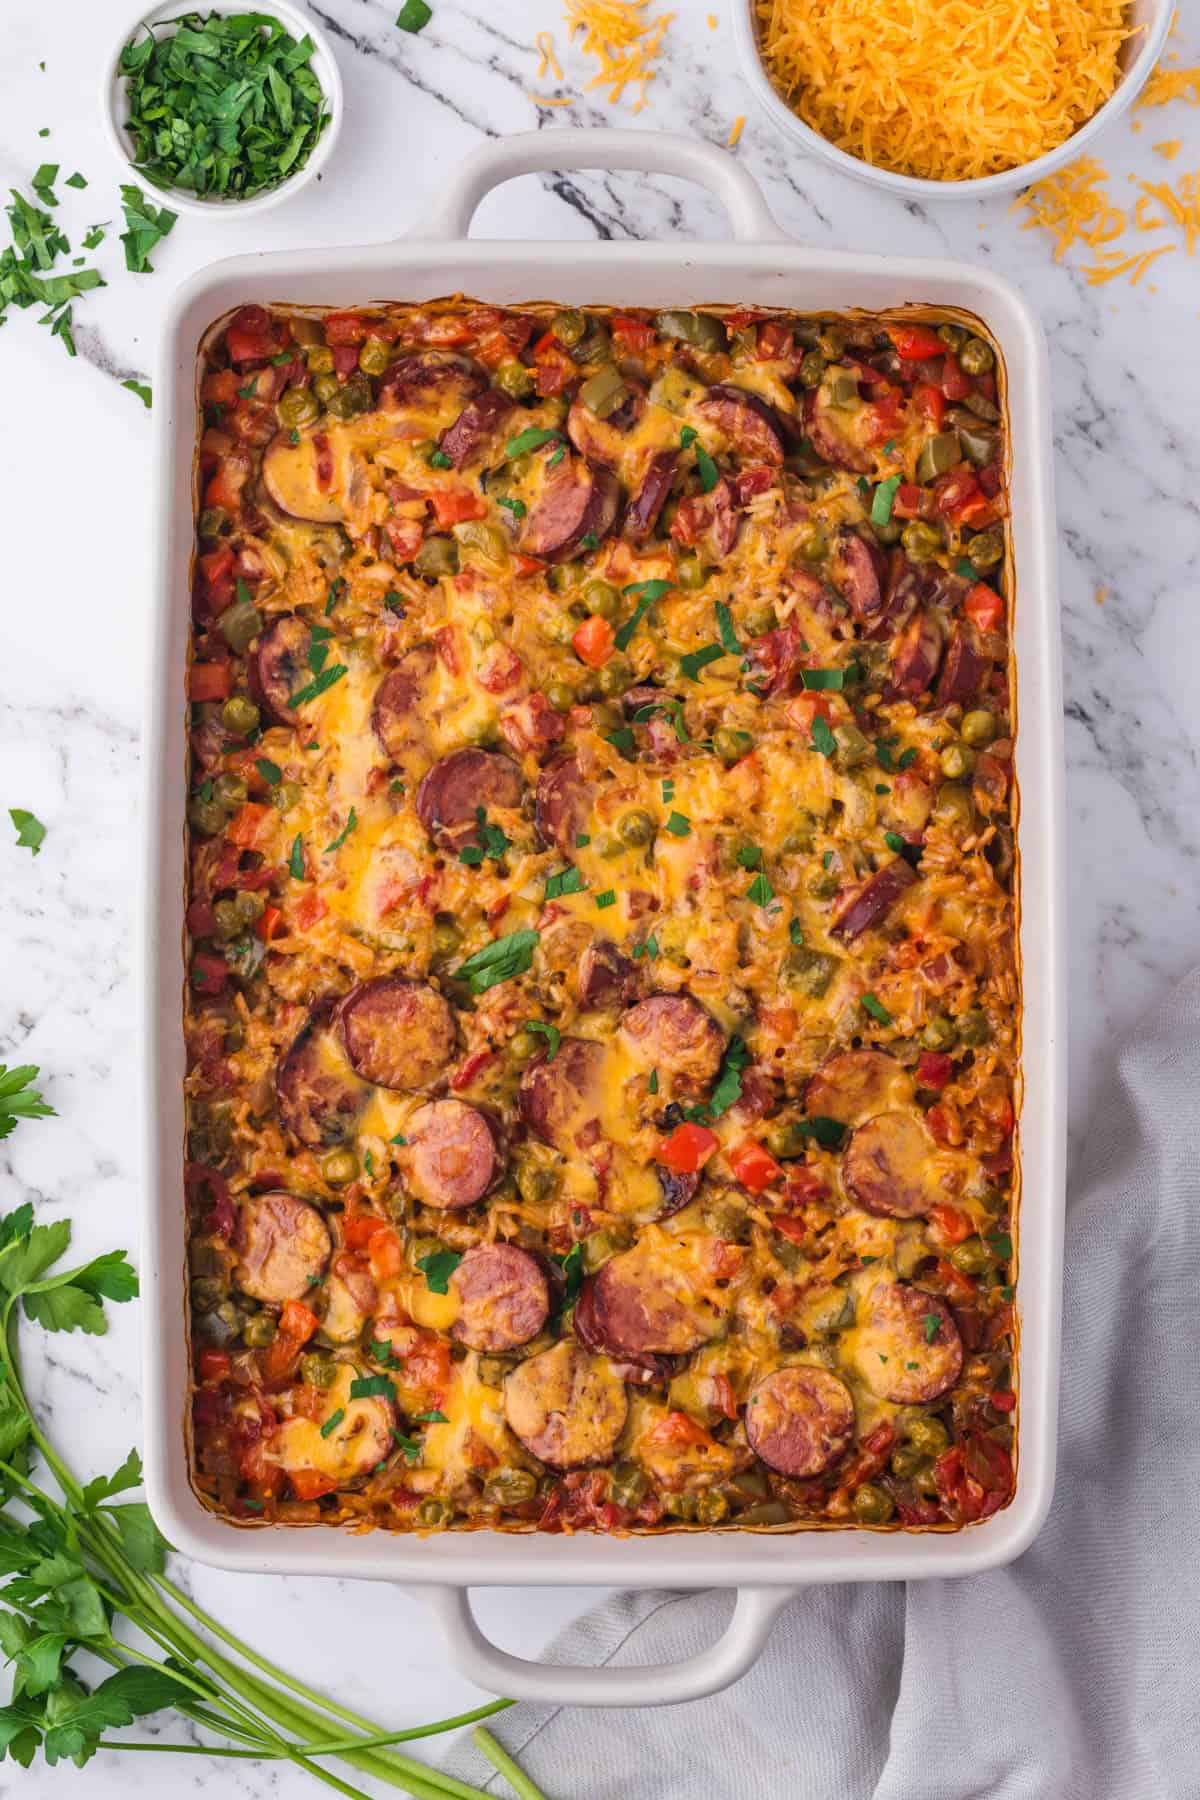 An overhead image of a 9x13 pan of sausage and rice casserole.